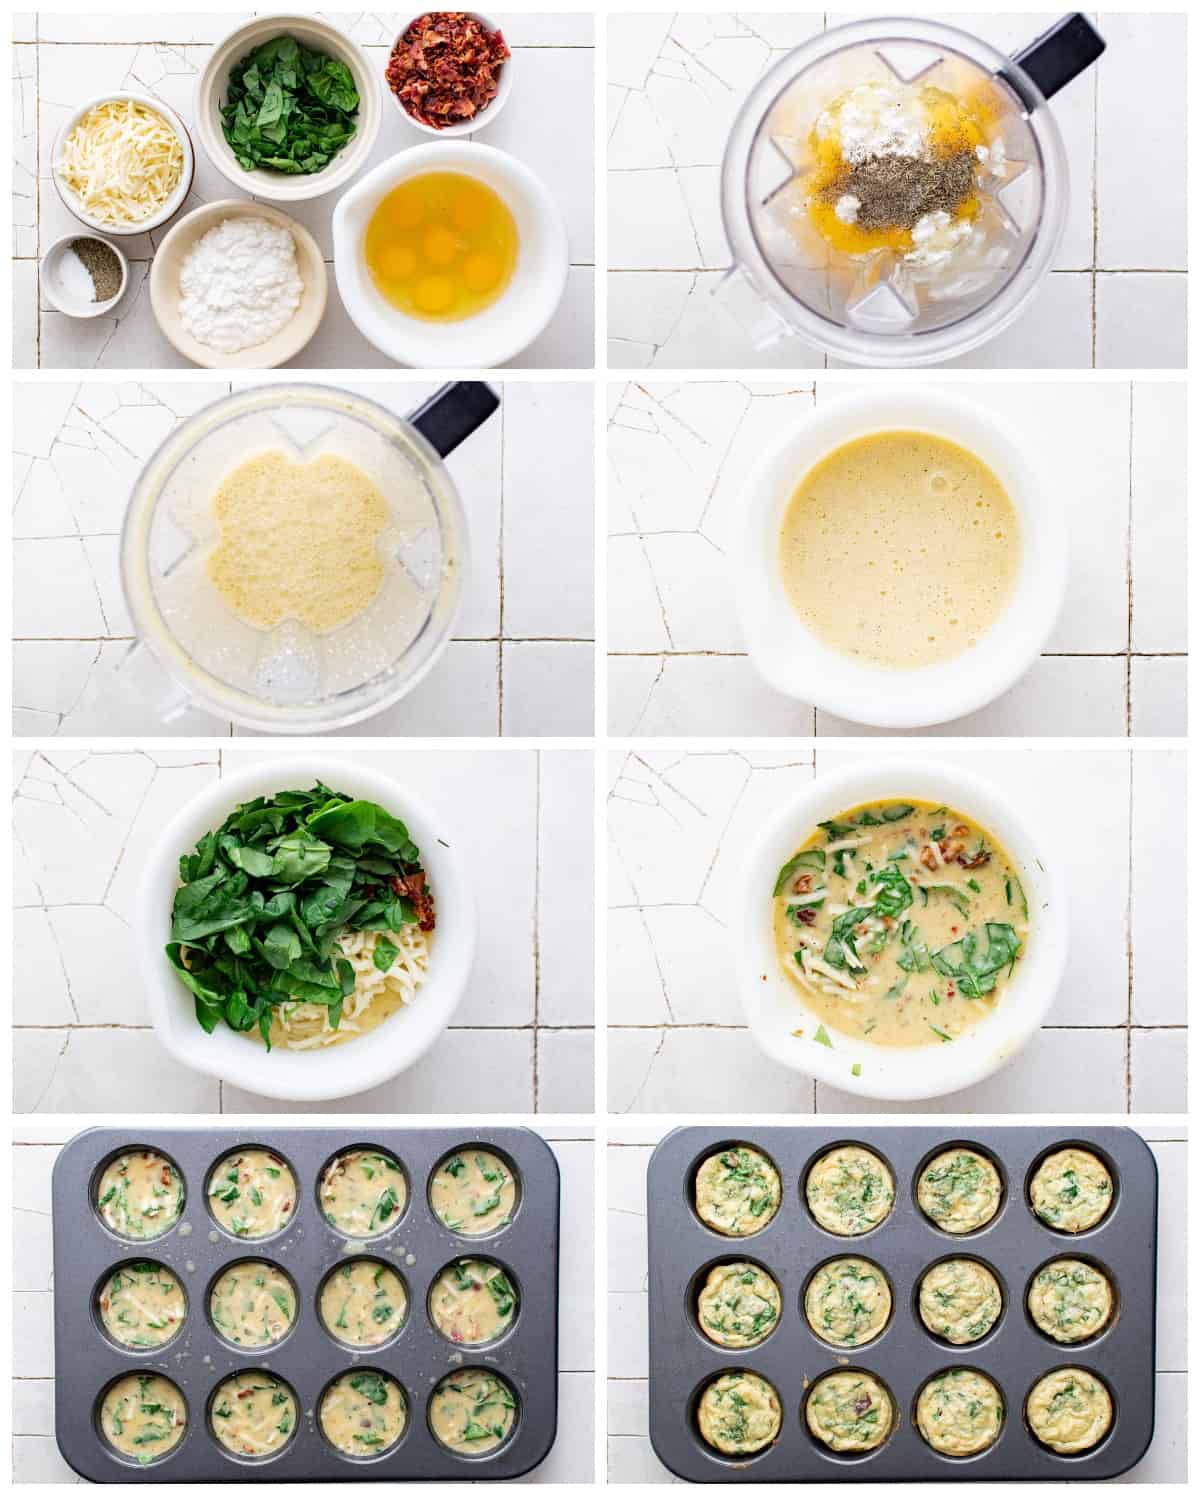 https://www.thecookierookie.com/wp-content/uploads/2022/03/step-by-step-photos-for-how-to-make-copycat-Starbucks-egg-bites.jpg